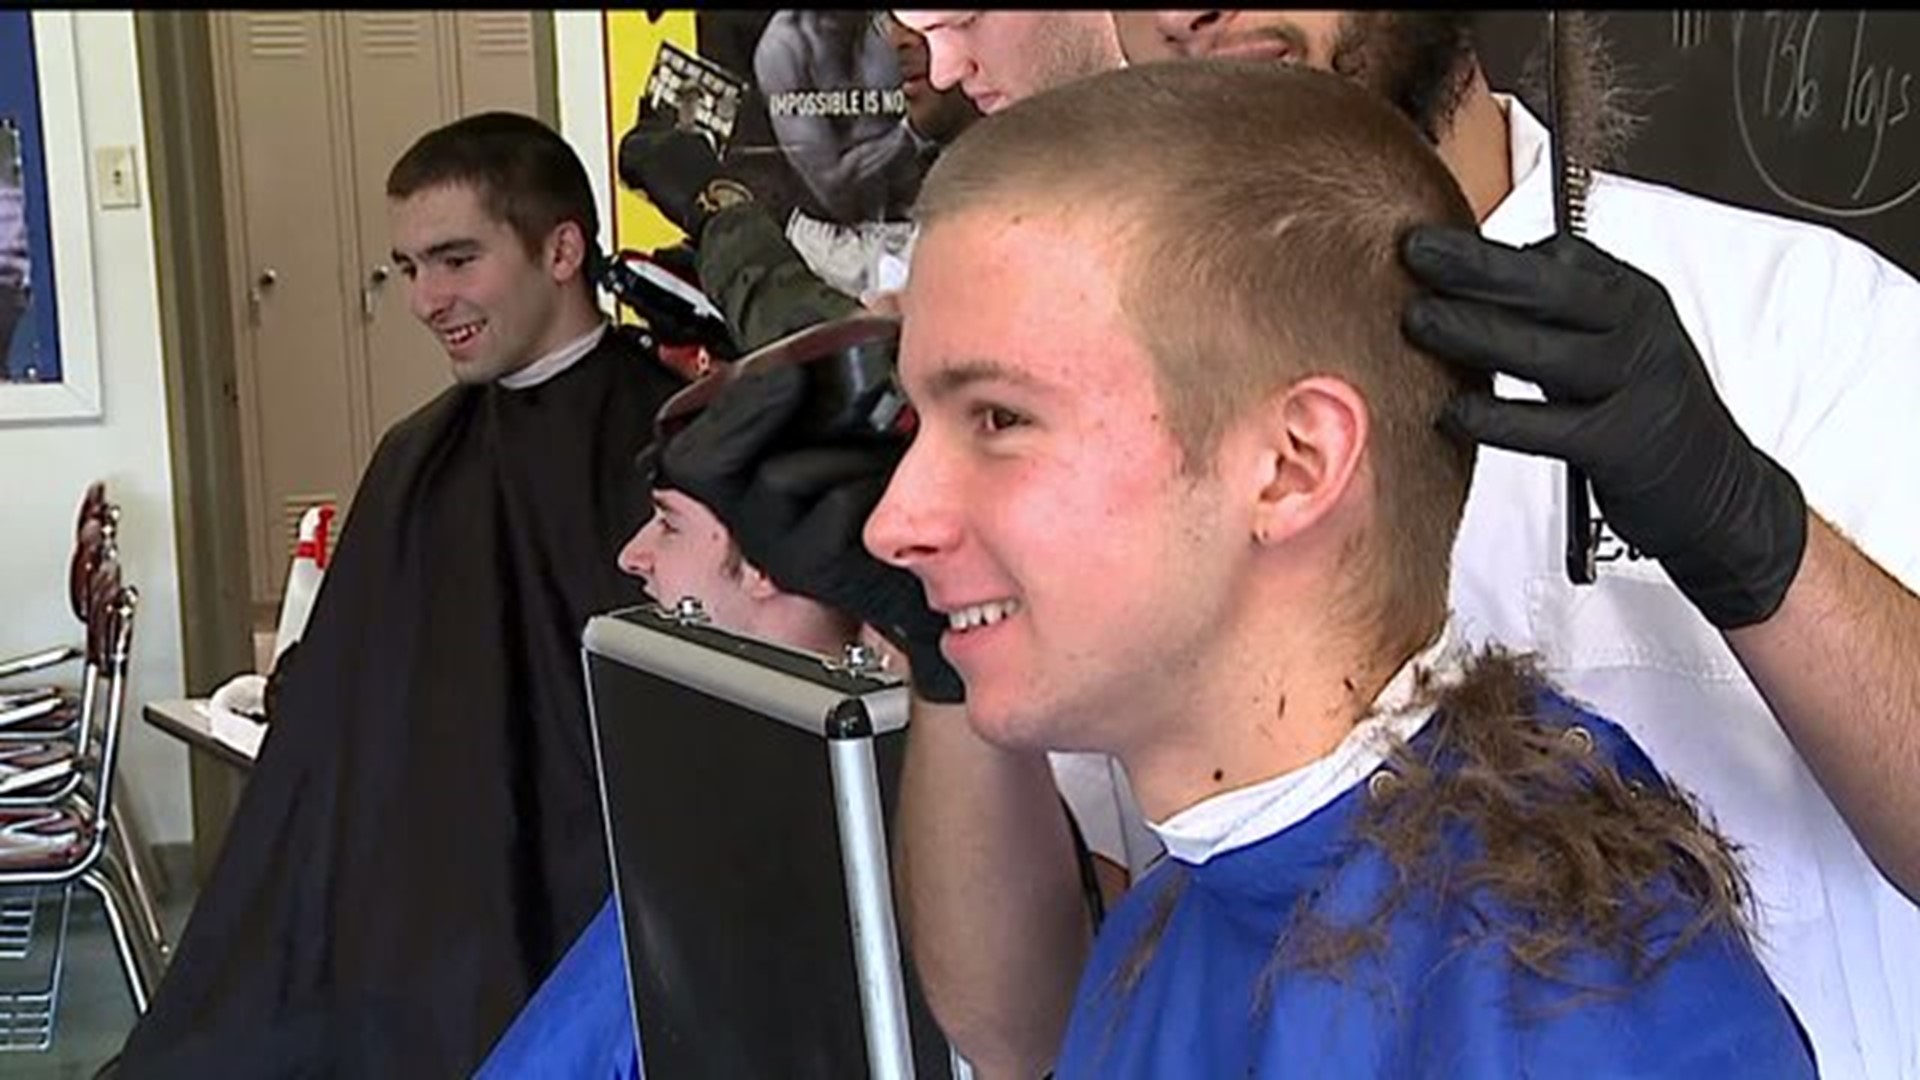 6 Lancaster Catholic seniors shave heads after reaching Toys-for-Tots goal